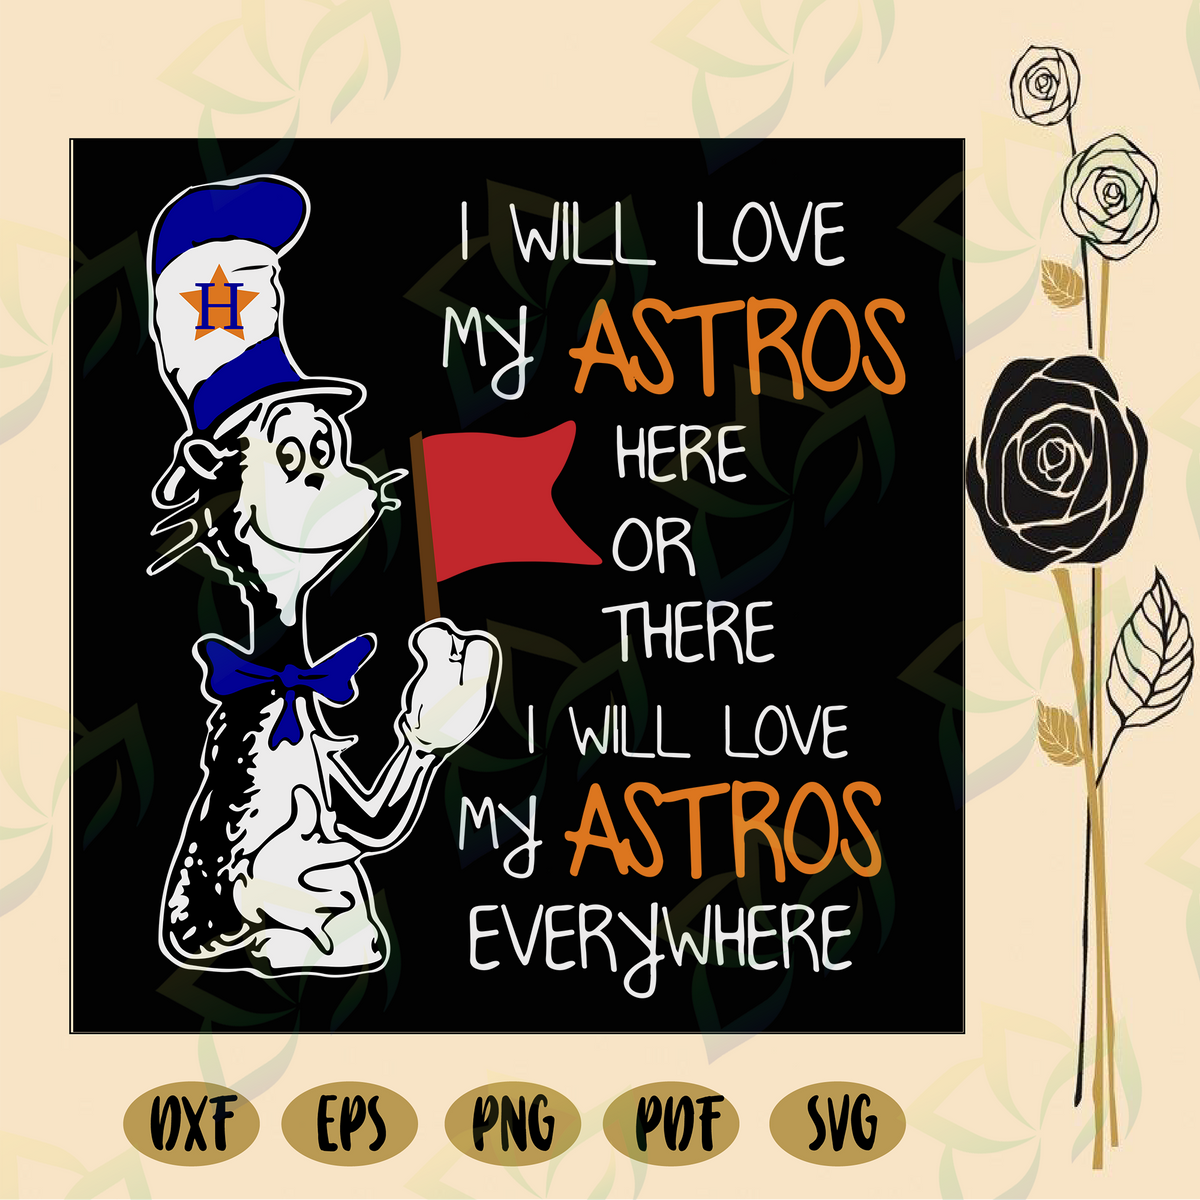 I Will Love My Astros Here Or There I Will Love My Astros Everywhere Blossomsvg